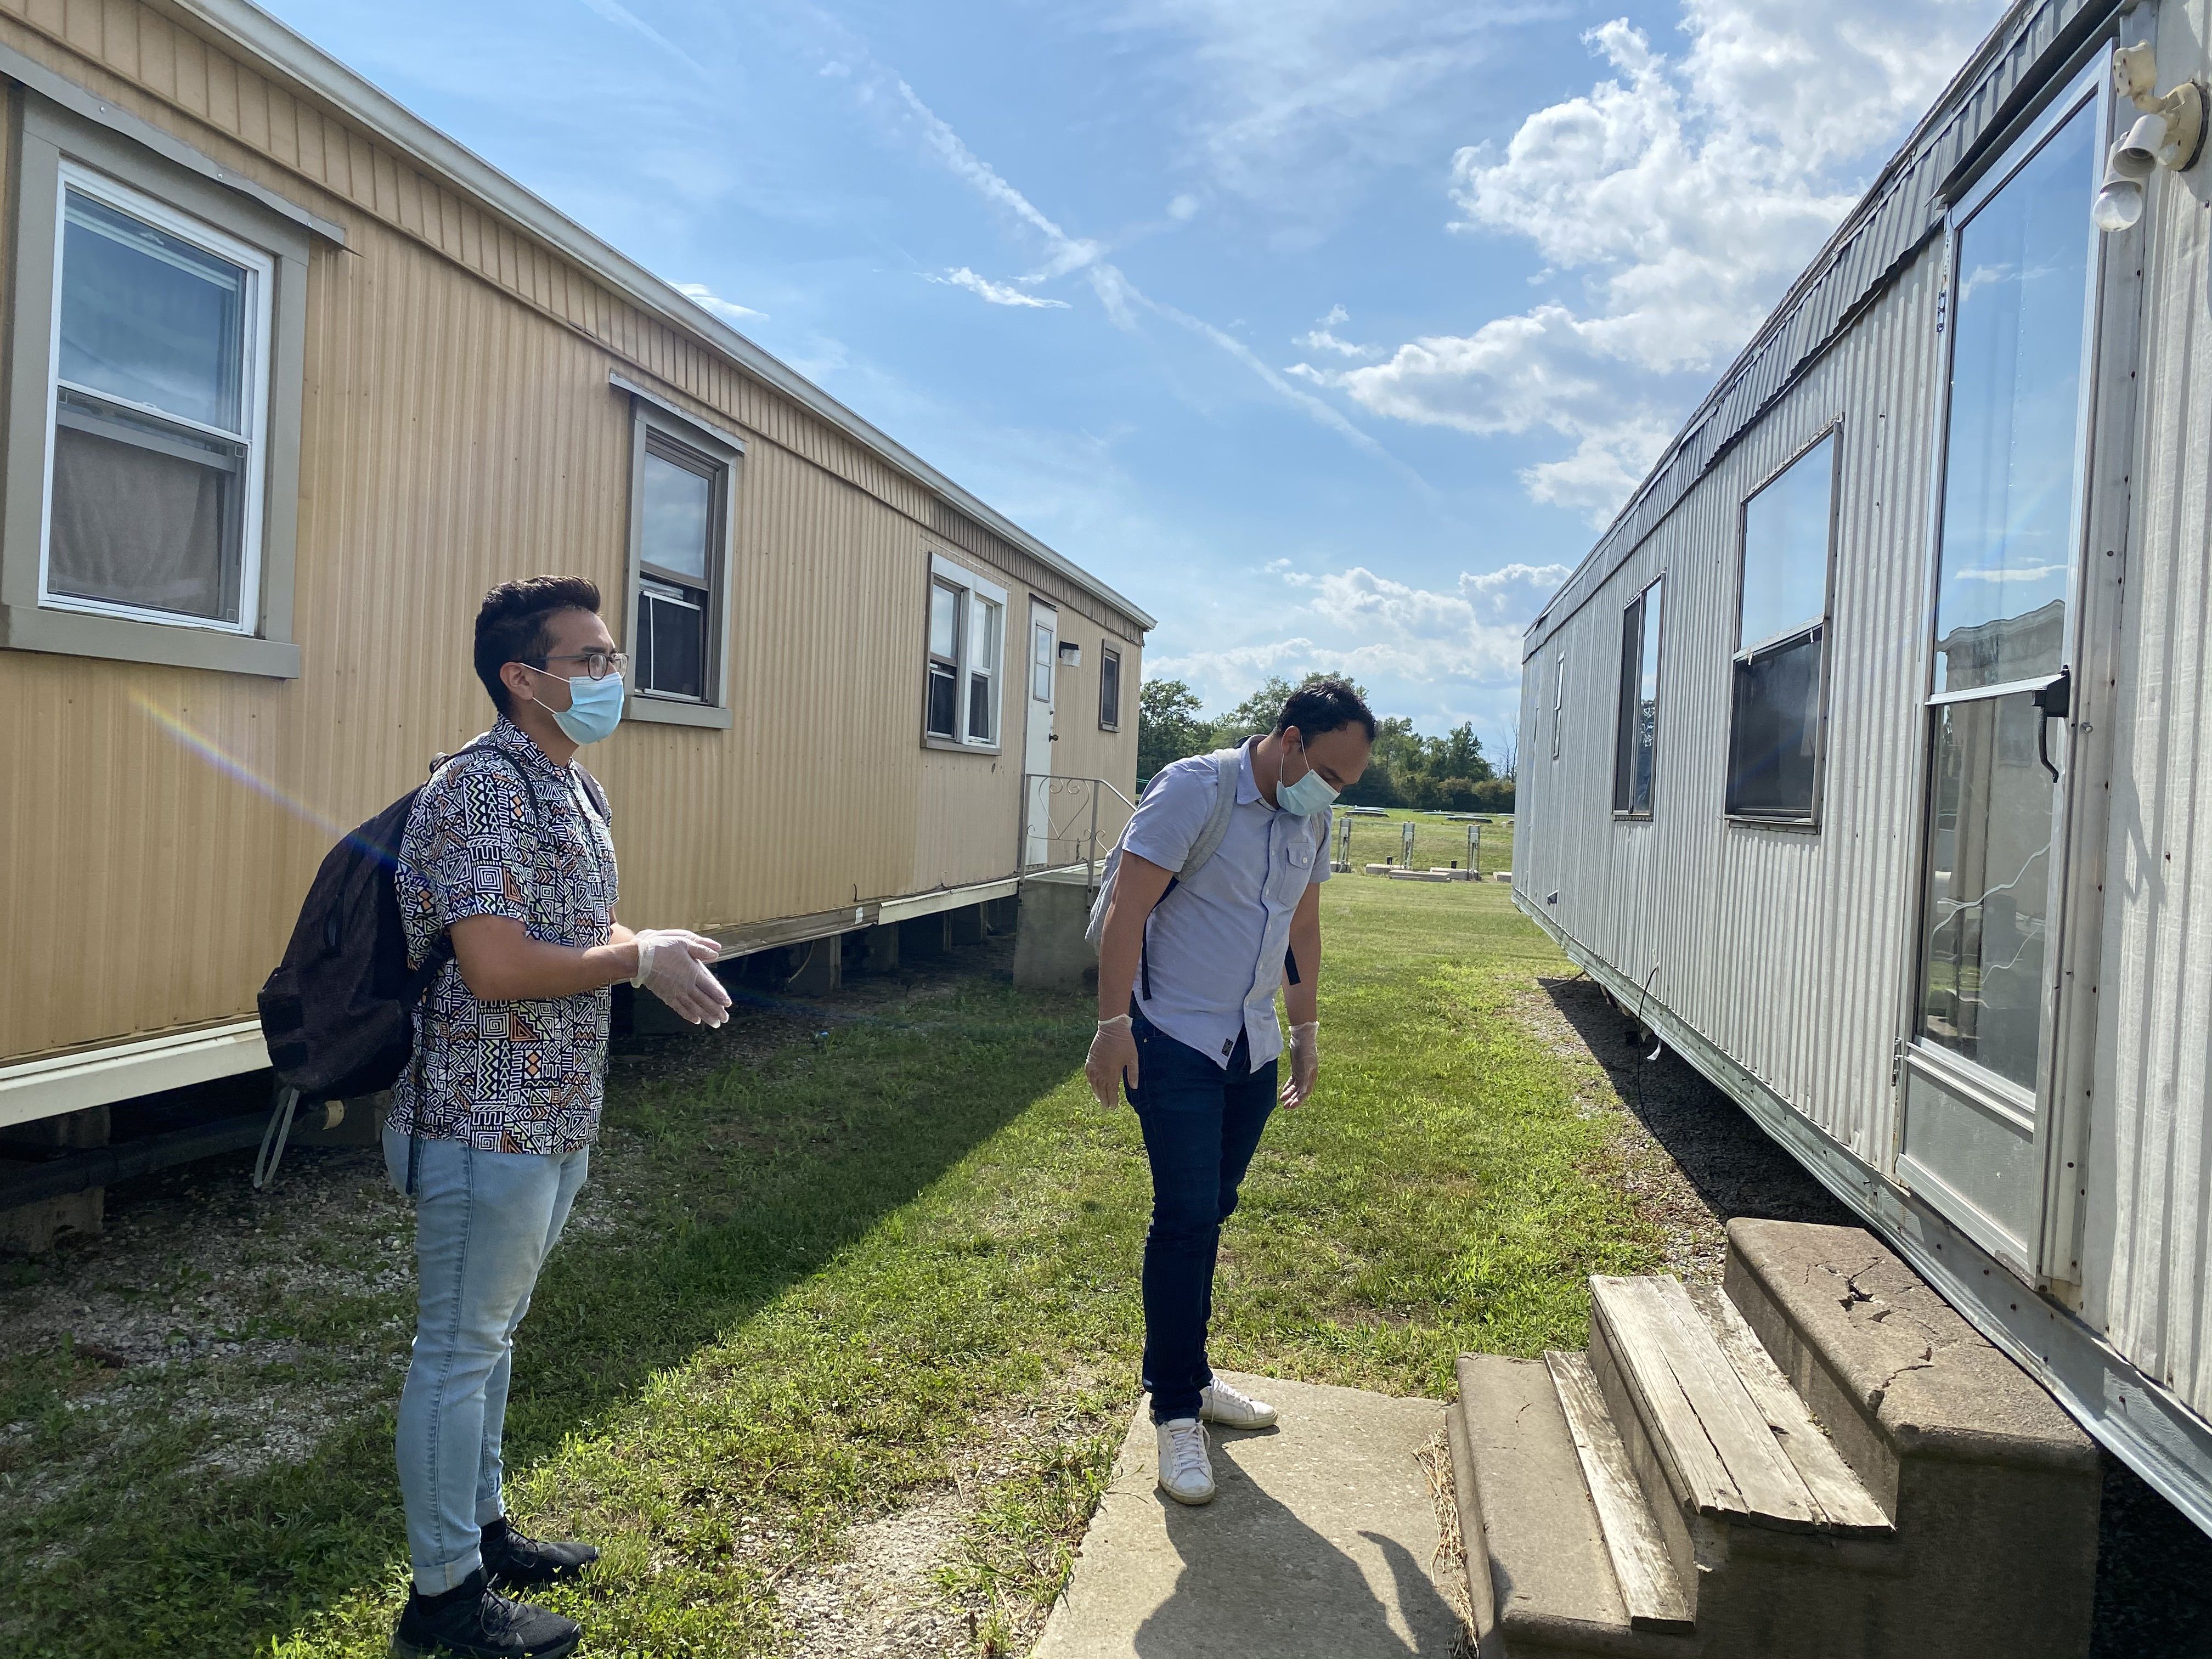 FLOC members Lorenzo Zamora (left) and Braulio Franco (right) wait outside for a farmworker to answer the door during their visit to Liskai Farms migrant camp. Image by Areeba Shah. United States, 2020.
